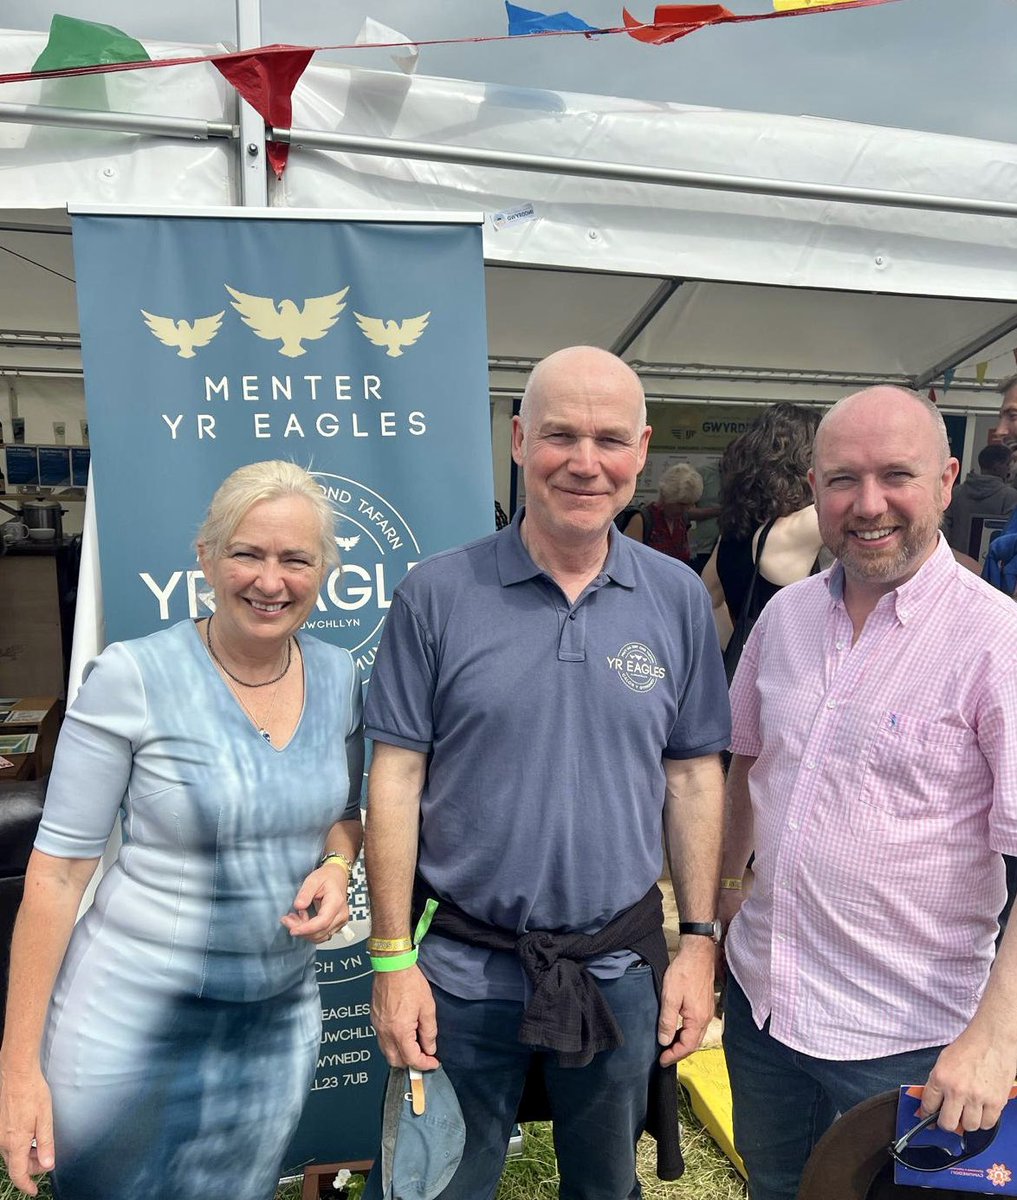 Called by @yr_eagles at the Eisteddfod today with @mabonapgwynfor to give our backing to the campaign to secure the pub for the local community. 

#YrEagles #Llanuwchllyn 🍻🏴󠁧󠁢󠁷󠁬󠁳󠁿